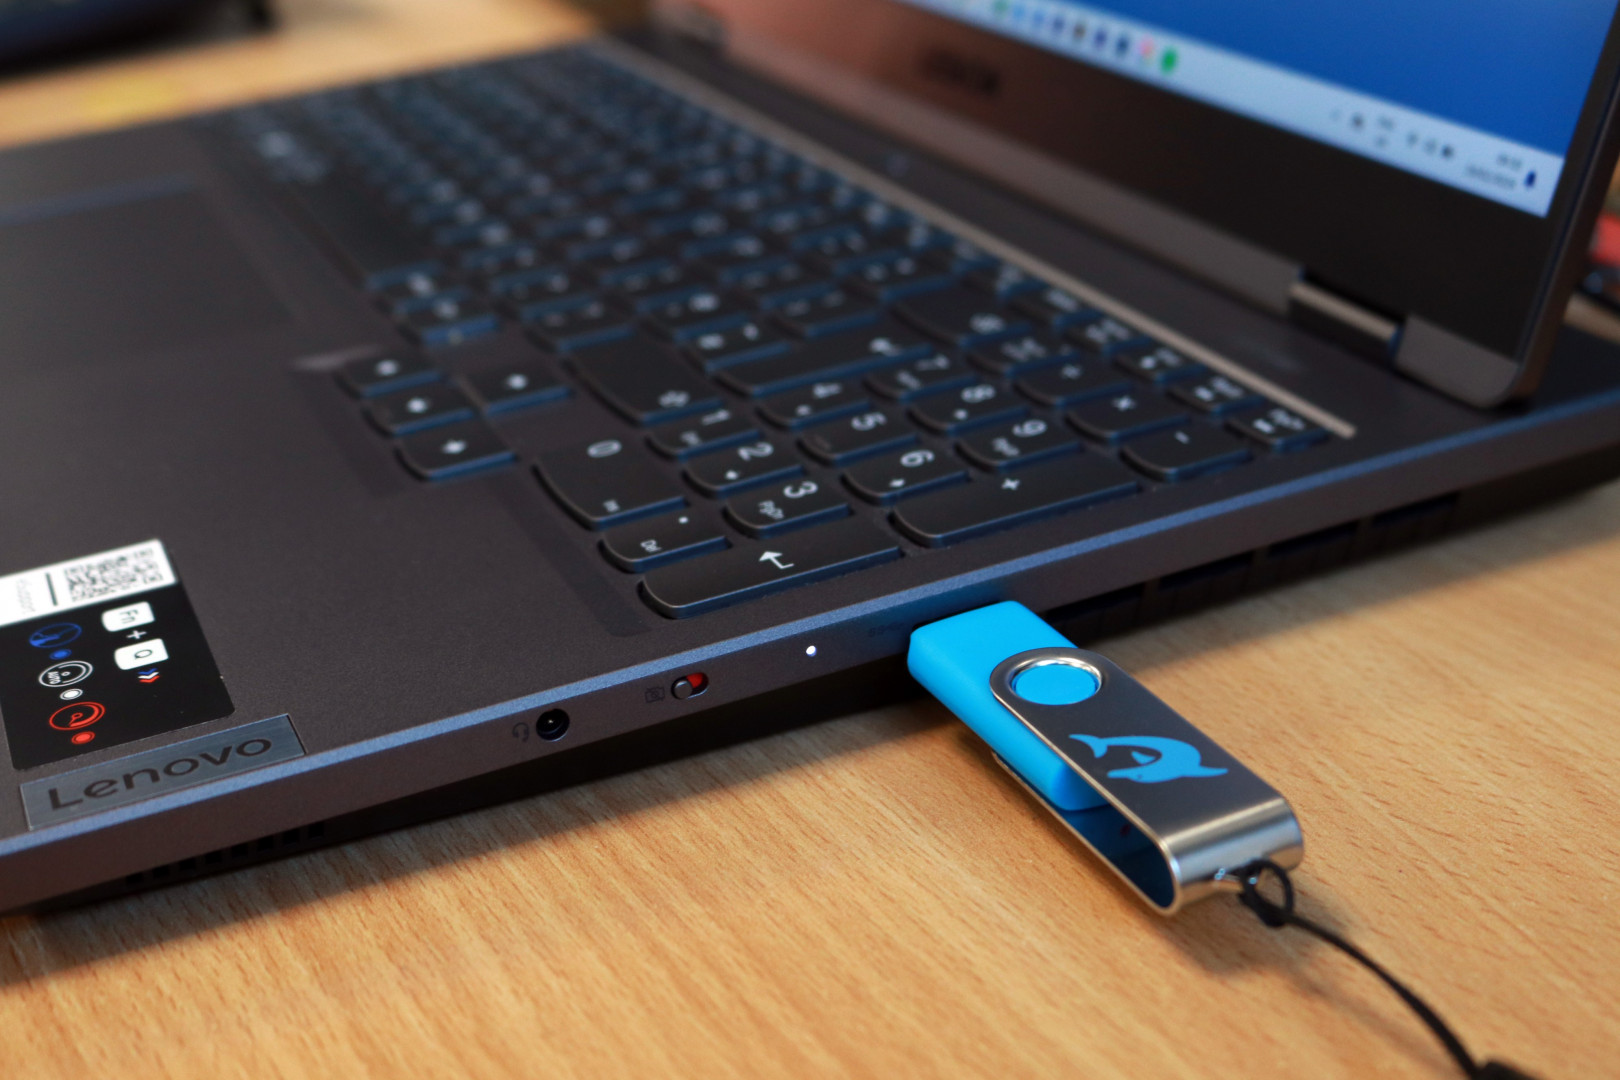 A Dolphin USB is being plugged into a laptop.